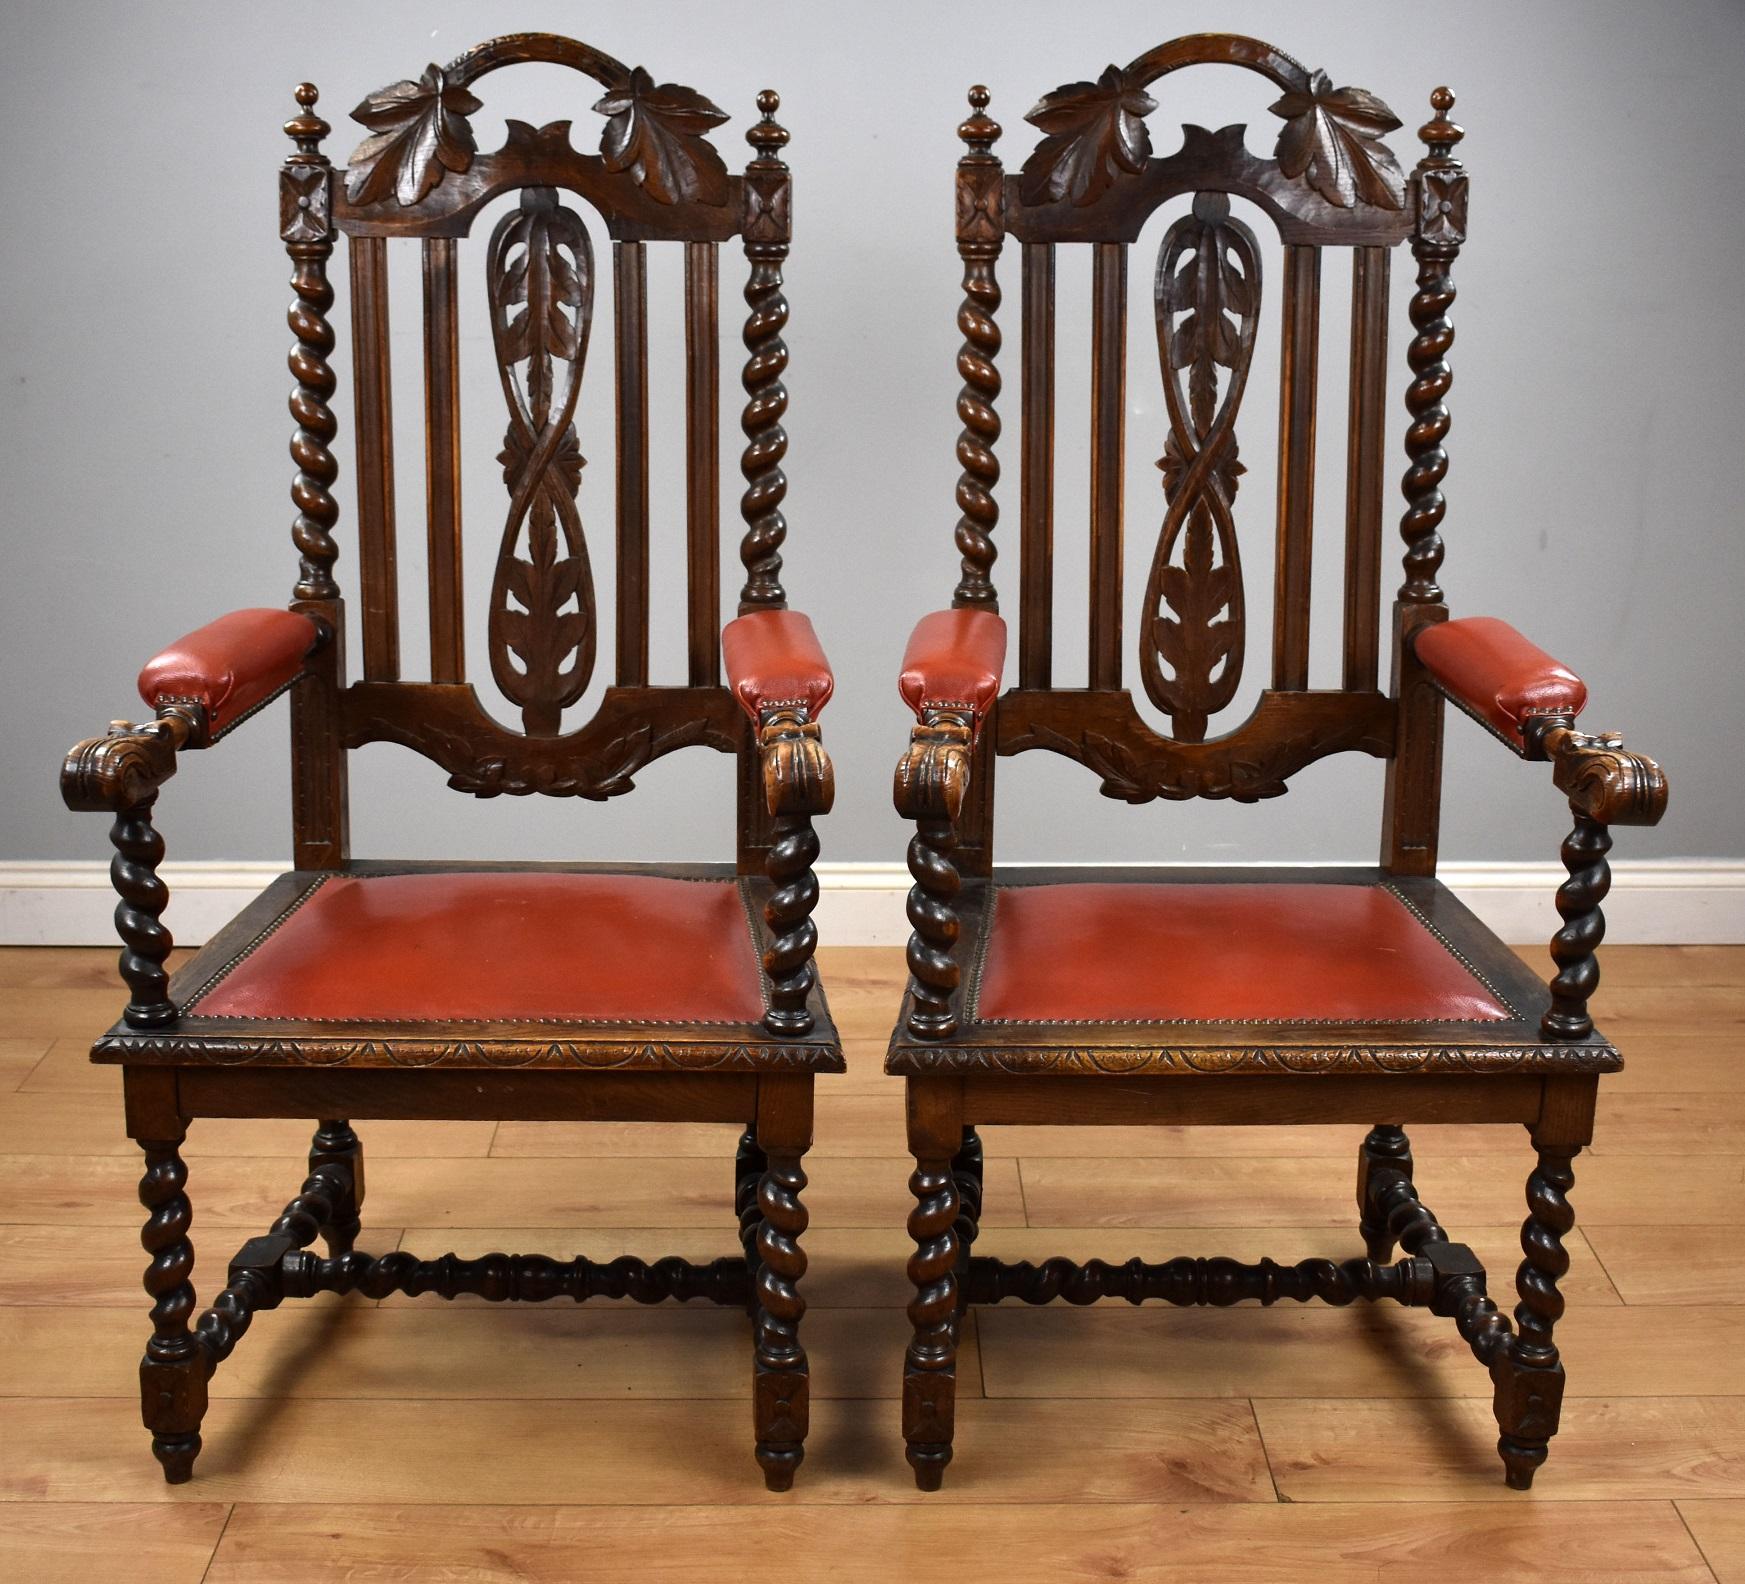 Pair oak barley twist arm chairs in good condition. The chairs have carved leaves to the top and centre of the backs, each side has barley twist columns with red upholstered arms with close studding to the edge and over stuffed seats. The chairs